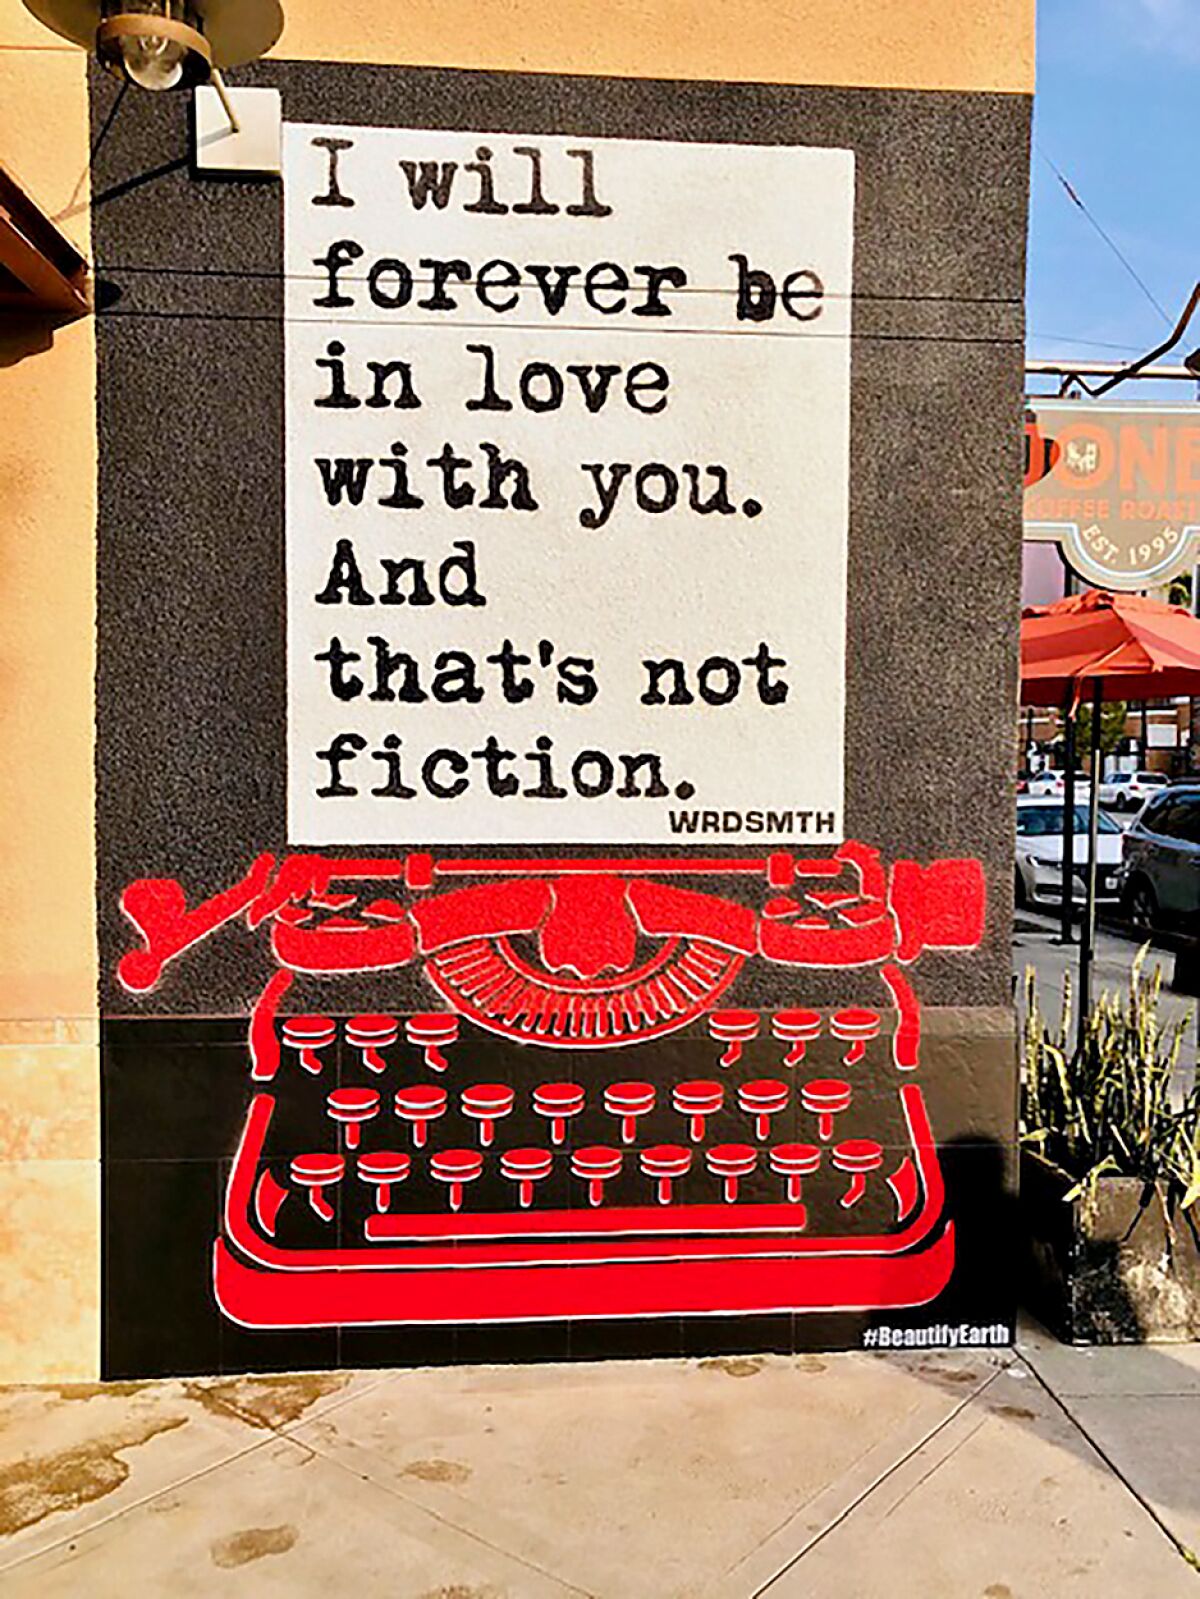 A mural of a red typewriter and piece of paper with the words "I will forever be in love with you. And that's not fiction."